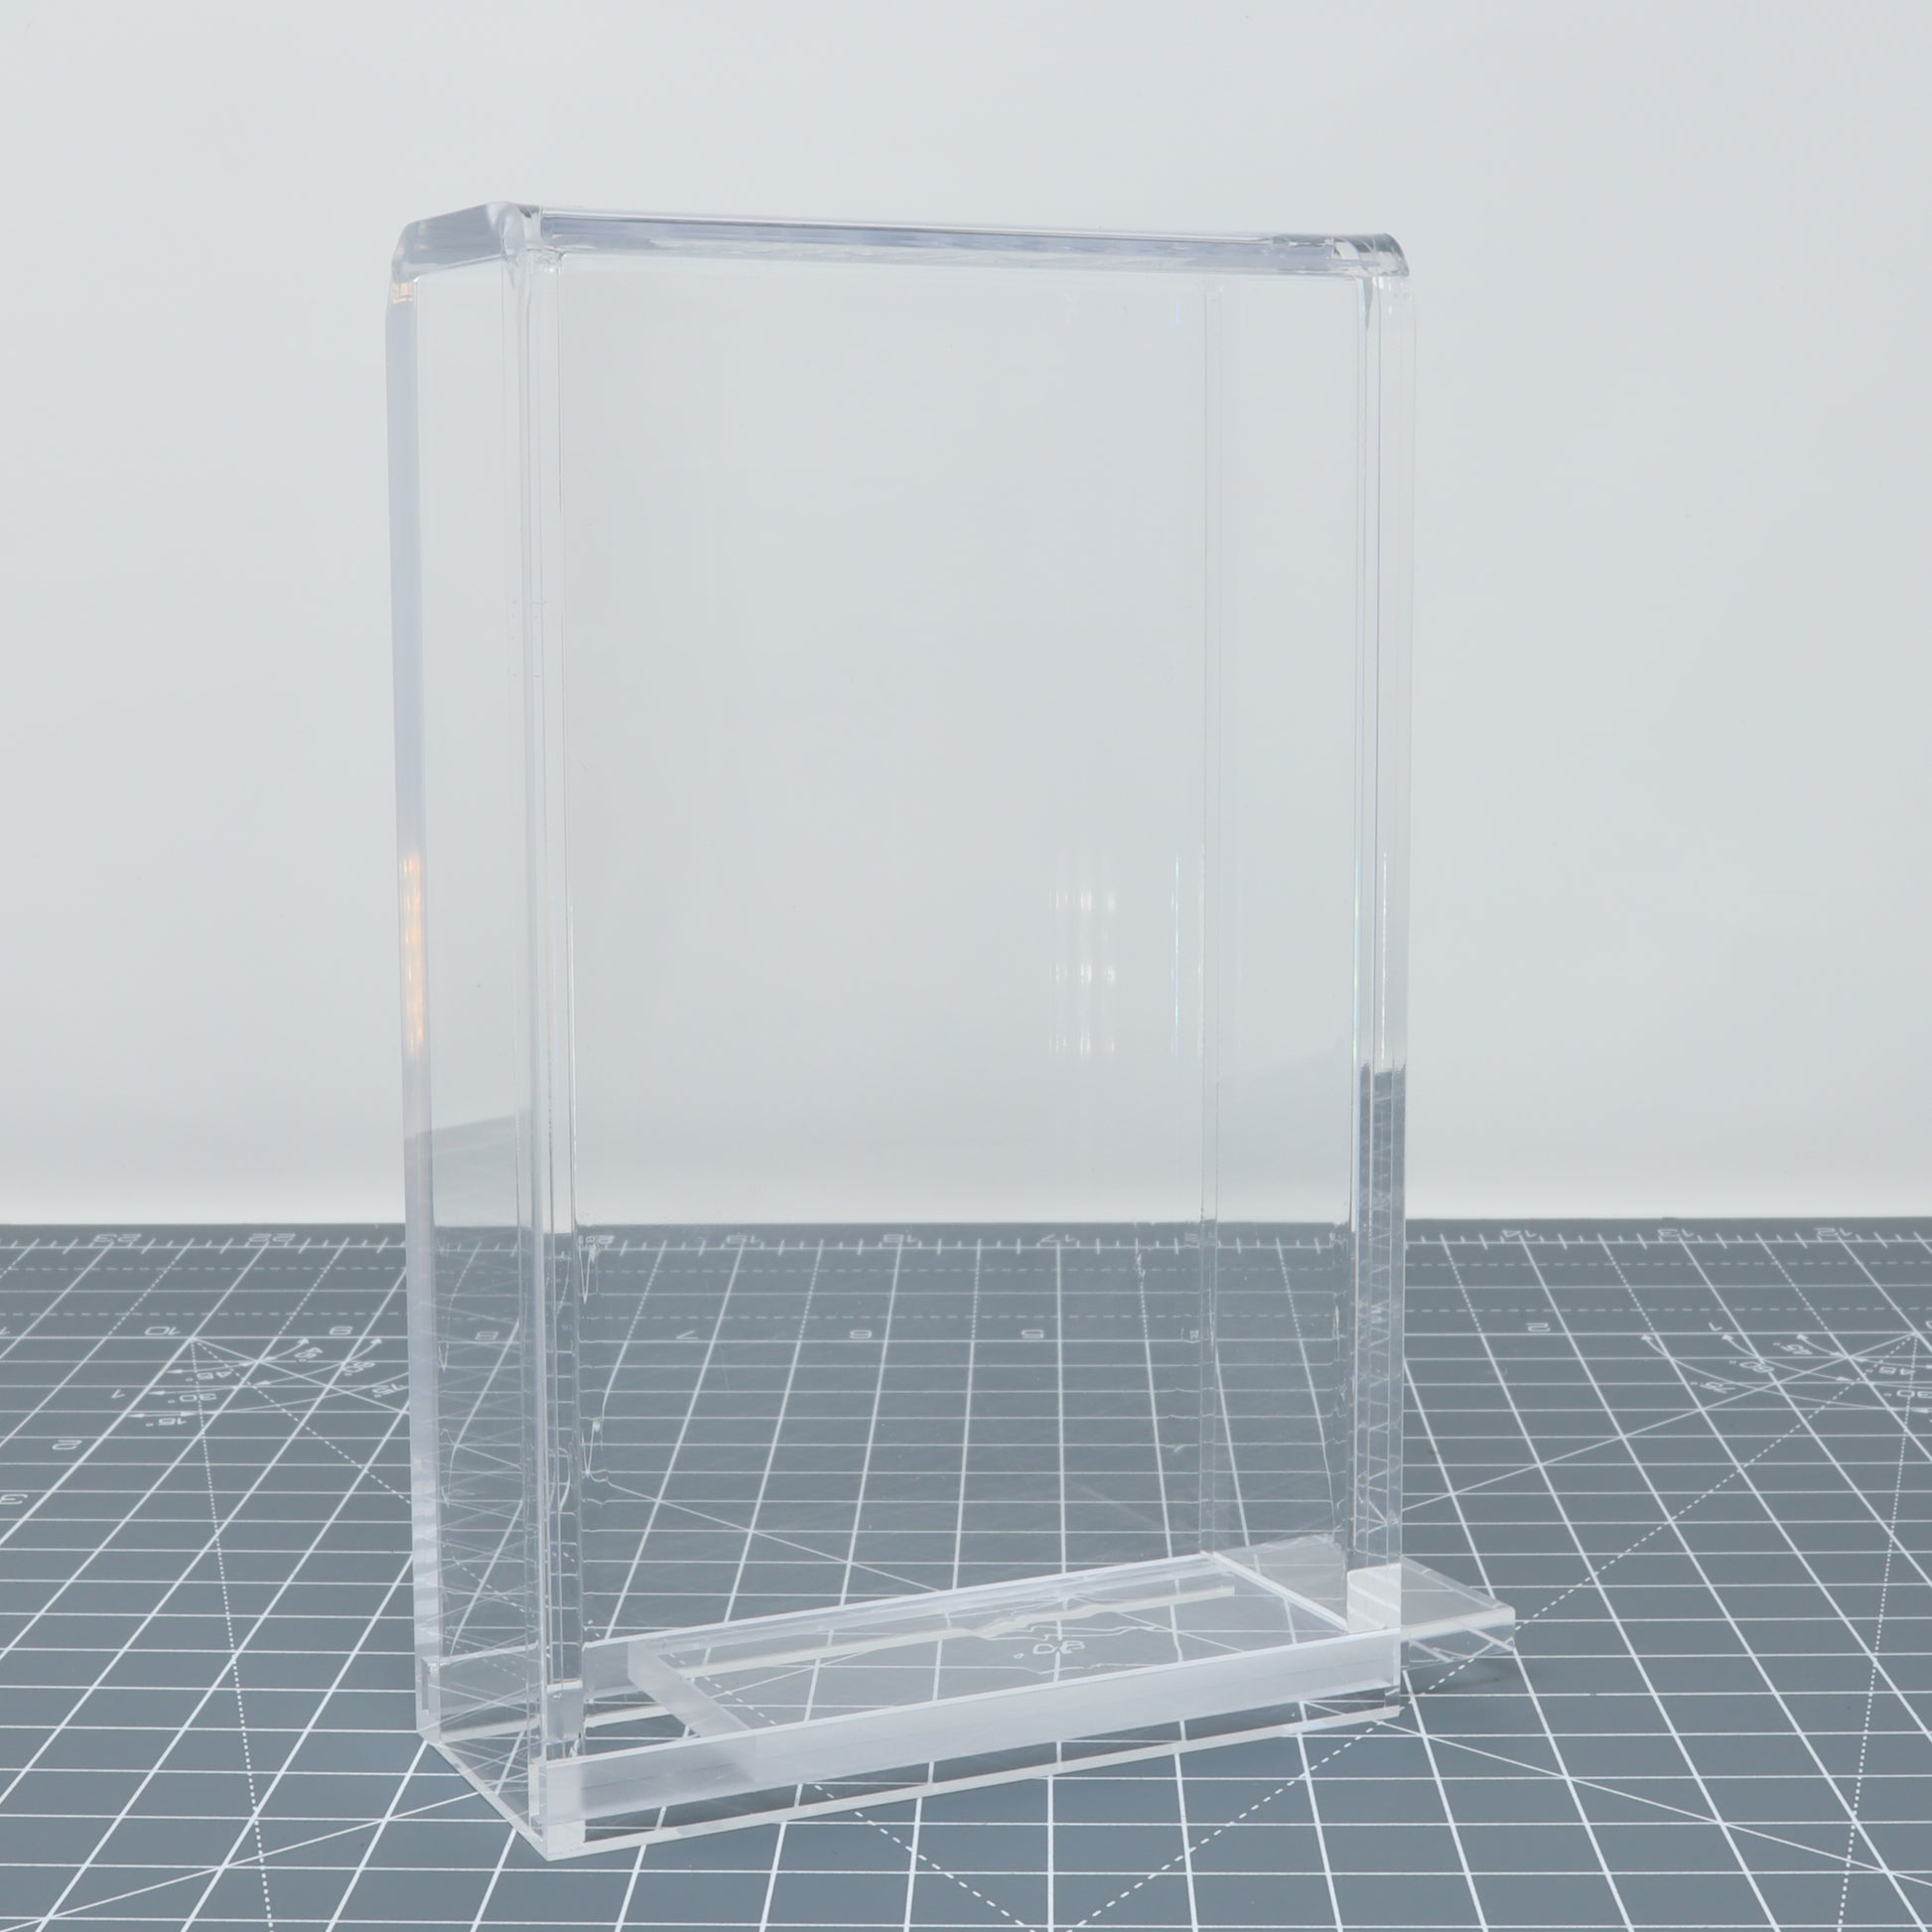 Transparent acrylic Game Boy Pocket display capsules on a gridded surface.